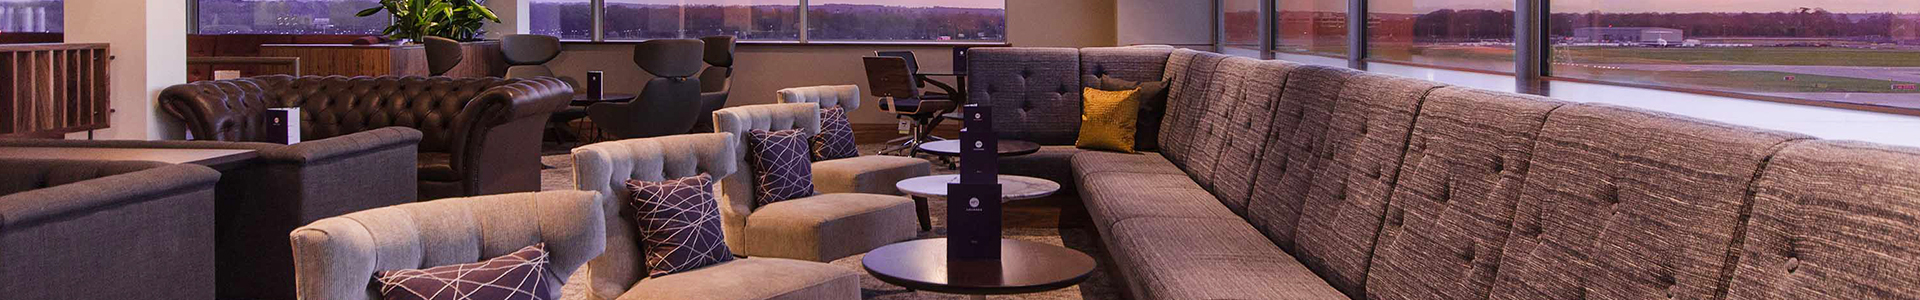 Airport Dimensions, Location, Airport Lounge seating area